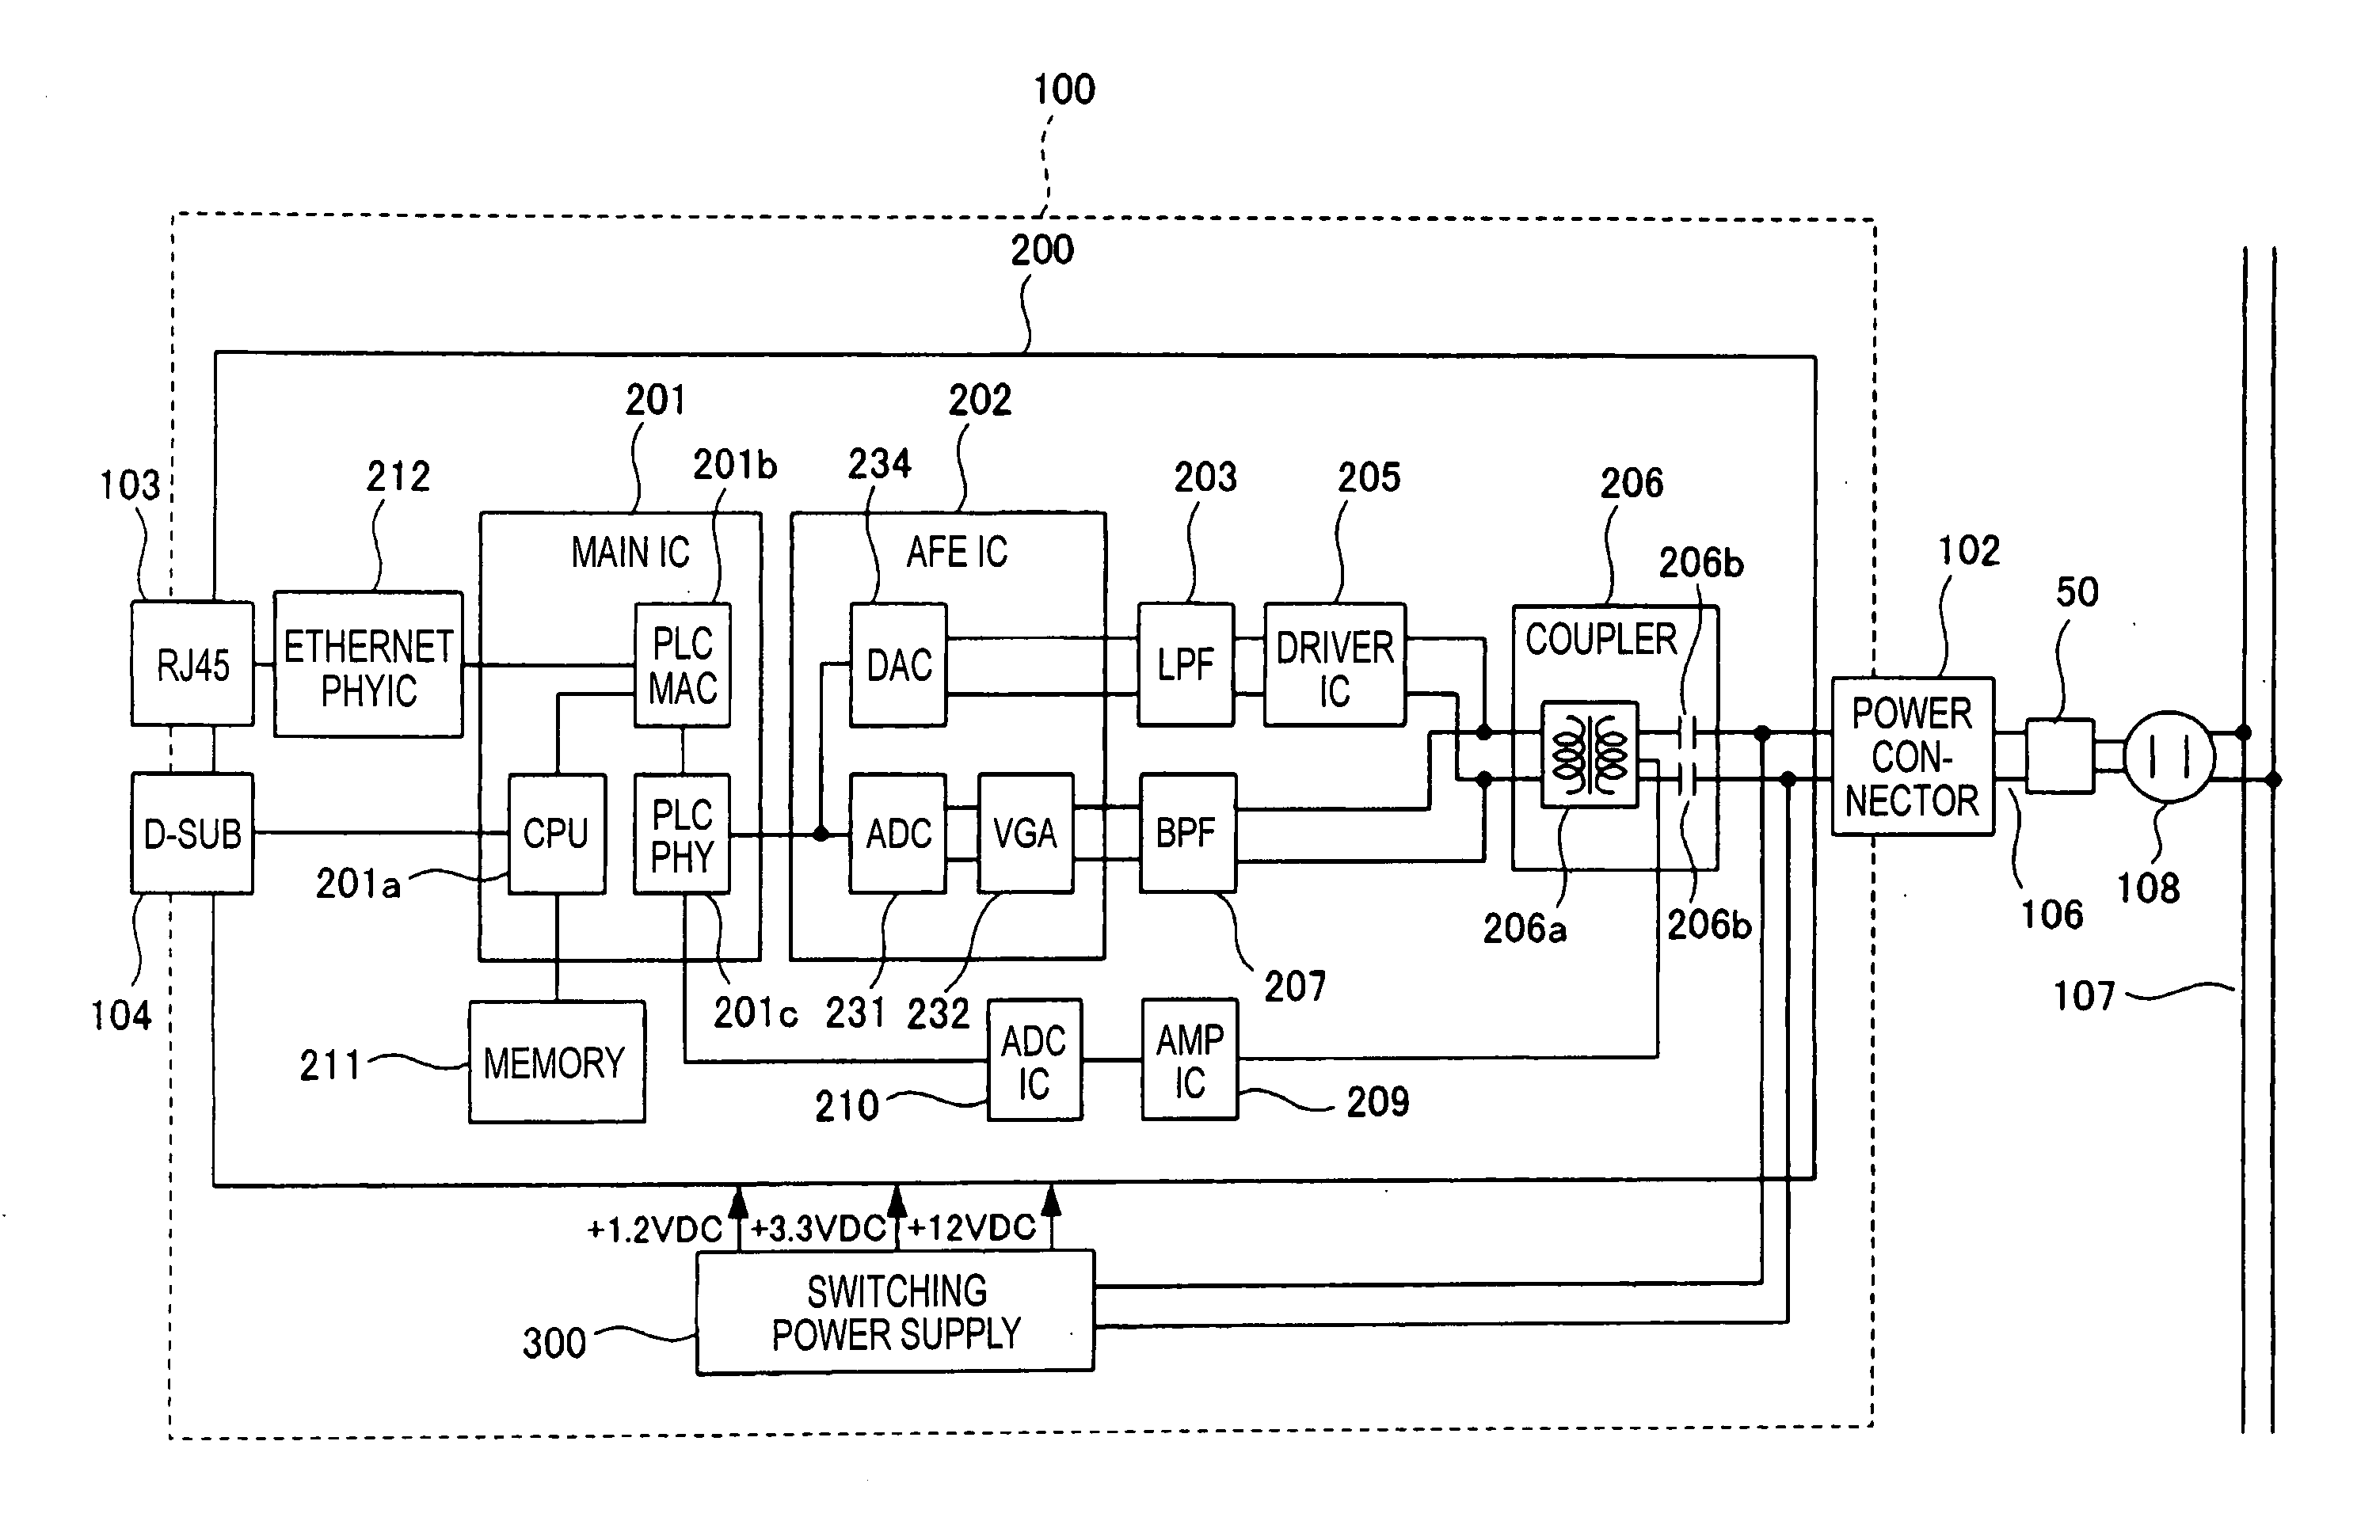 Relay apparatus and electric appliance